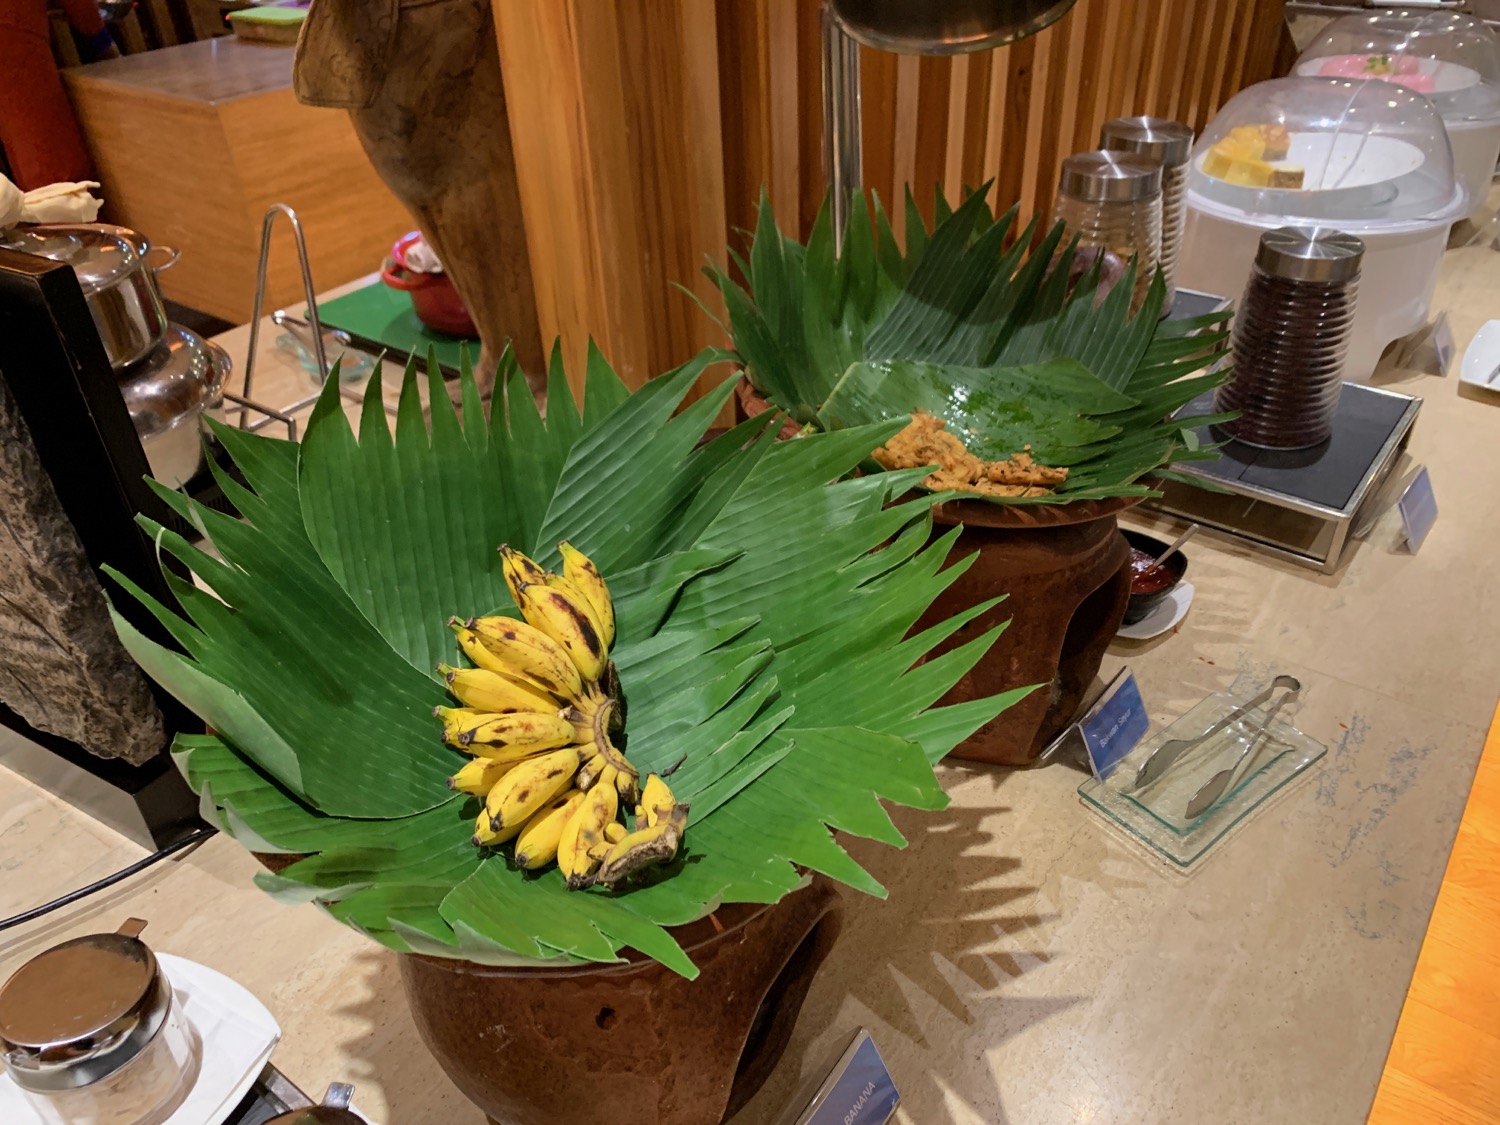 a bunch of bananas on a leafy plant